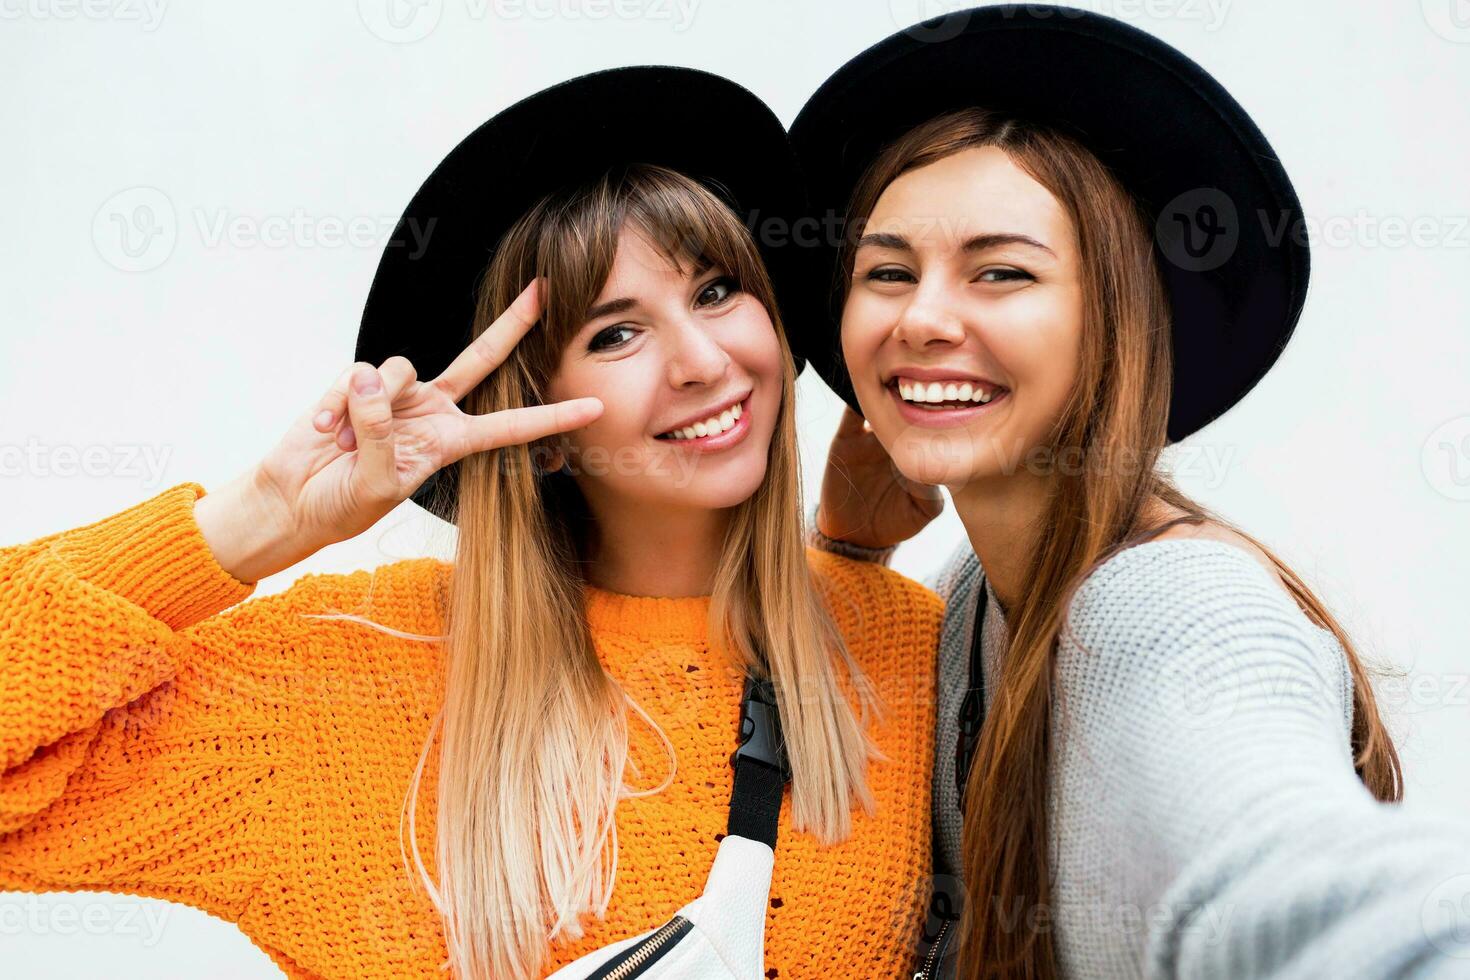 Friendship, happiness and people concept. Two smiling girls whispering gossip on white background.  Orange sweater, black similar hats. photo